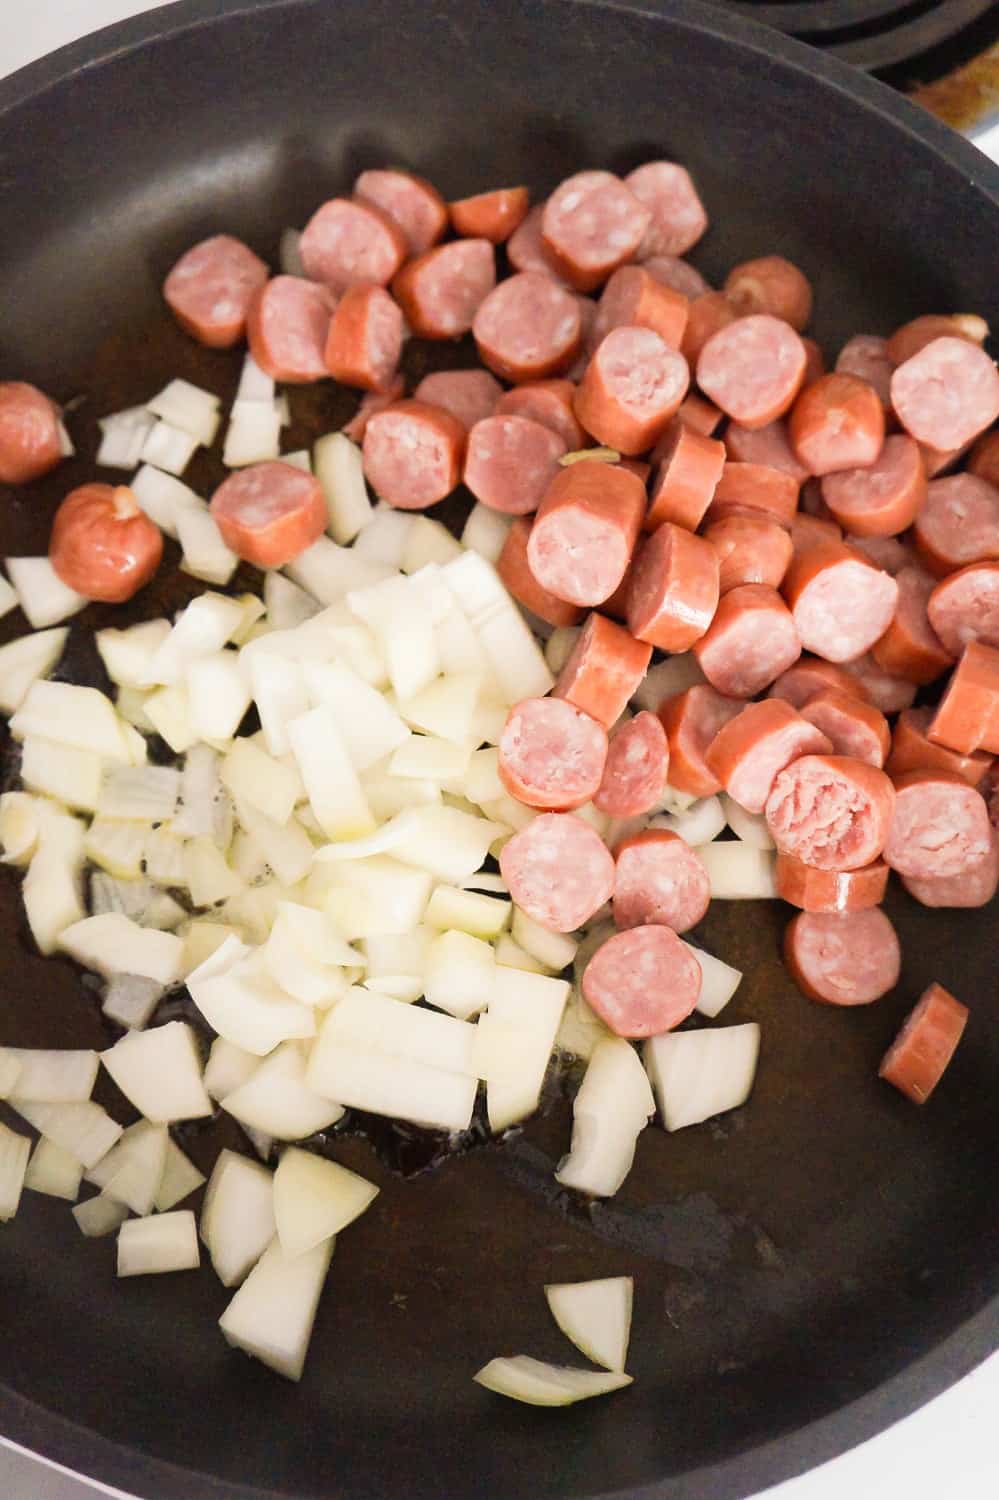 diced onions and chopped breakfast sausage in a frying pan